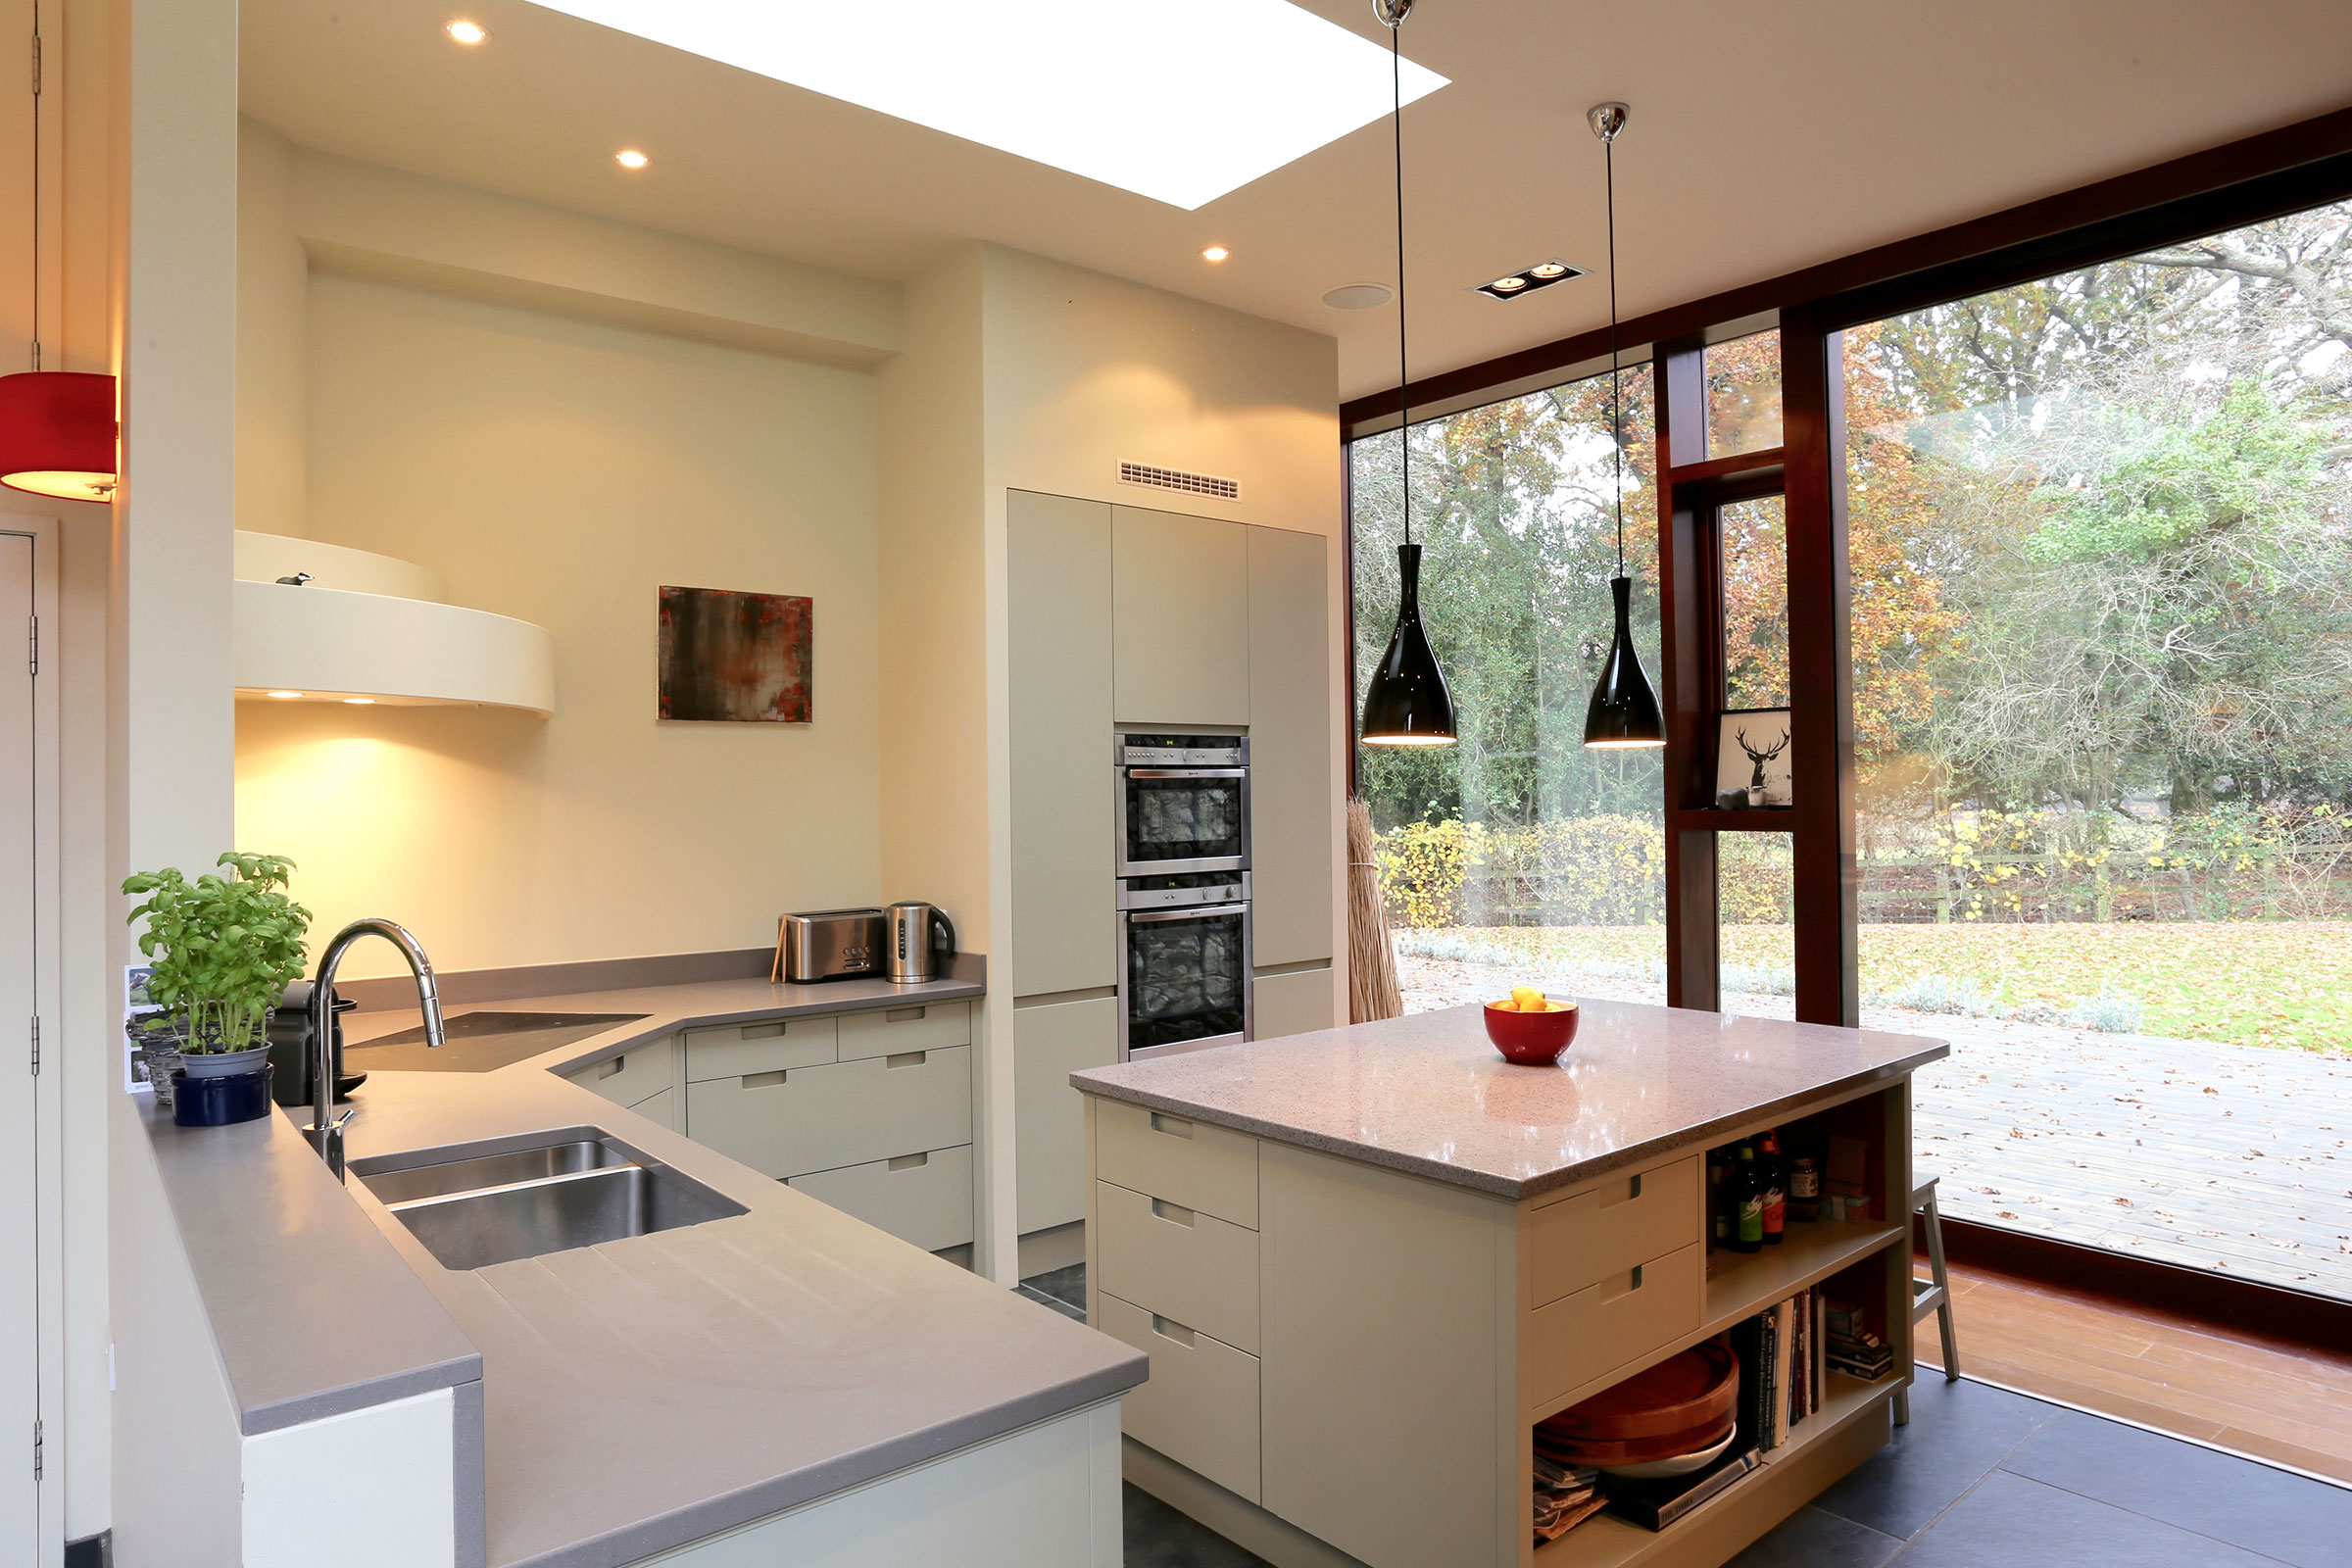 handless contemporary kitchen with flase wall work to house ovens